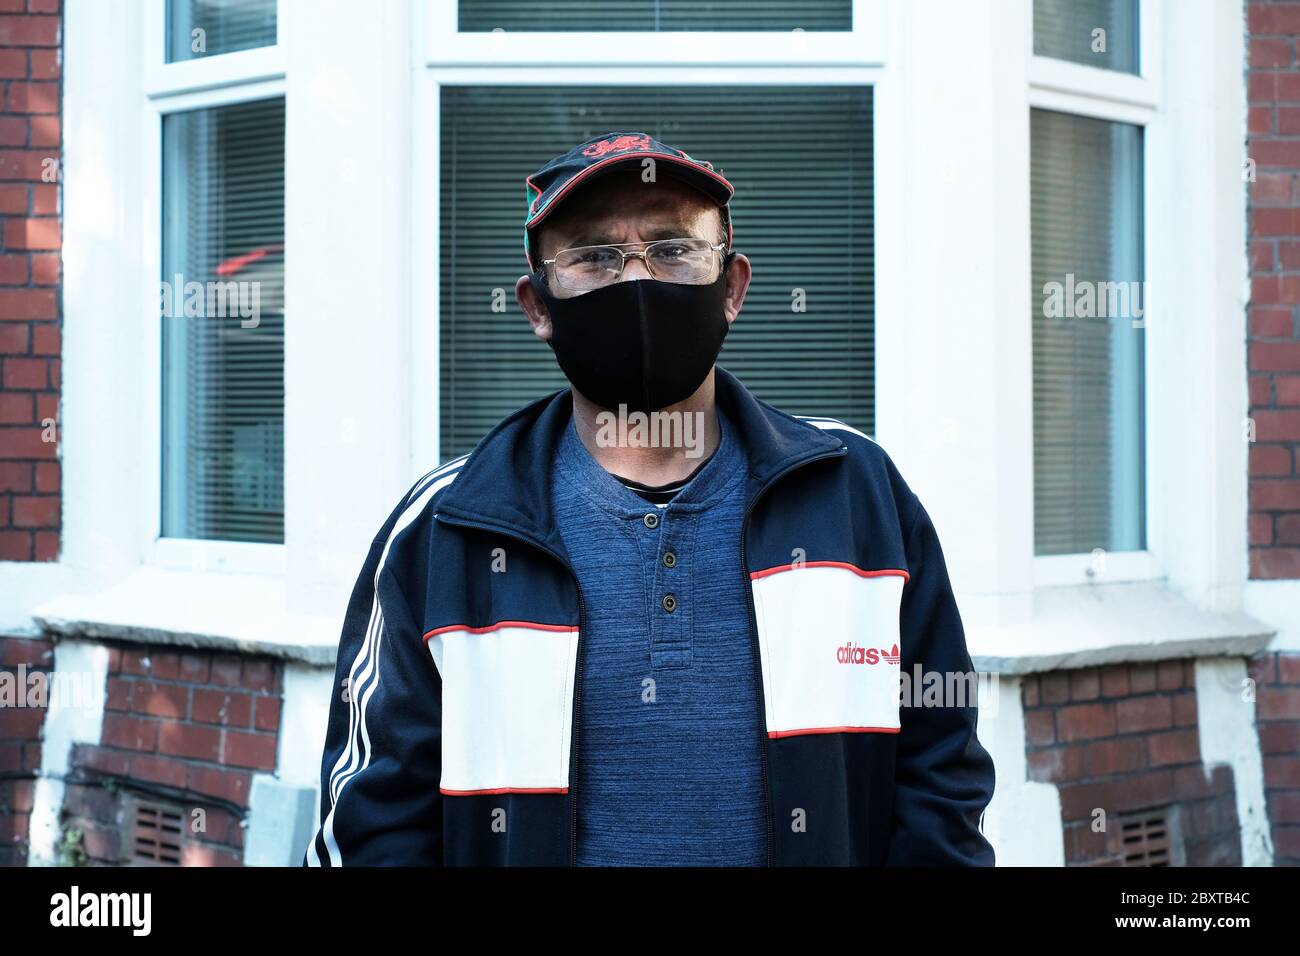 Public wearing a mask in Cardiff during the coronavirus pandemic 2020 Stock Photo